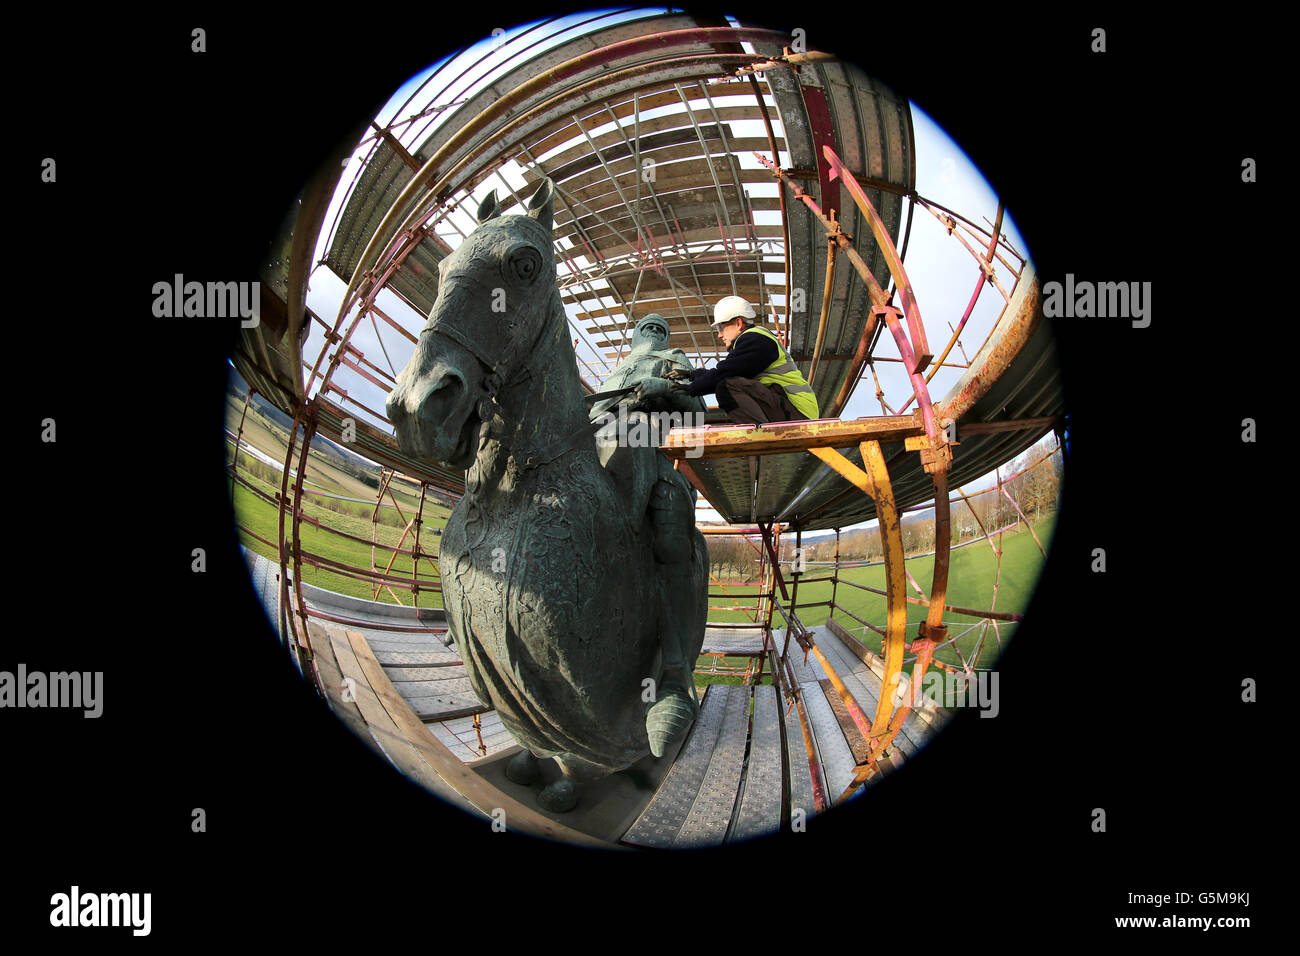 NOTE: PICTURE TAKEN WITH A FISHEYE LENS Mike Reid site manager, begins the restoration work on the weather-beaten statue of Robert the Bruce statue at the Battle of Bannockburn site, to restore the statue ahead of the 700th anniversary of the battle where Bruce is said to have defeated King Edward II's English army to secure an independent monarch for Scotland. Stock Photo